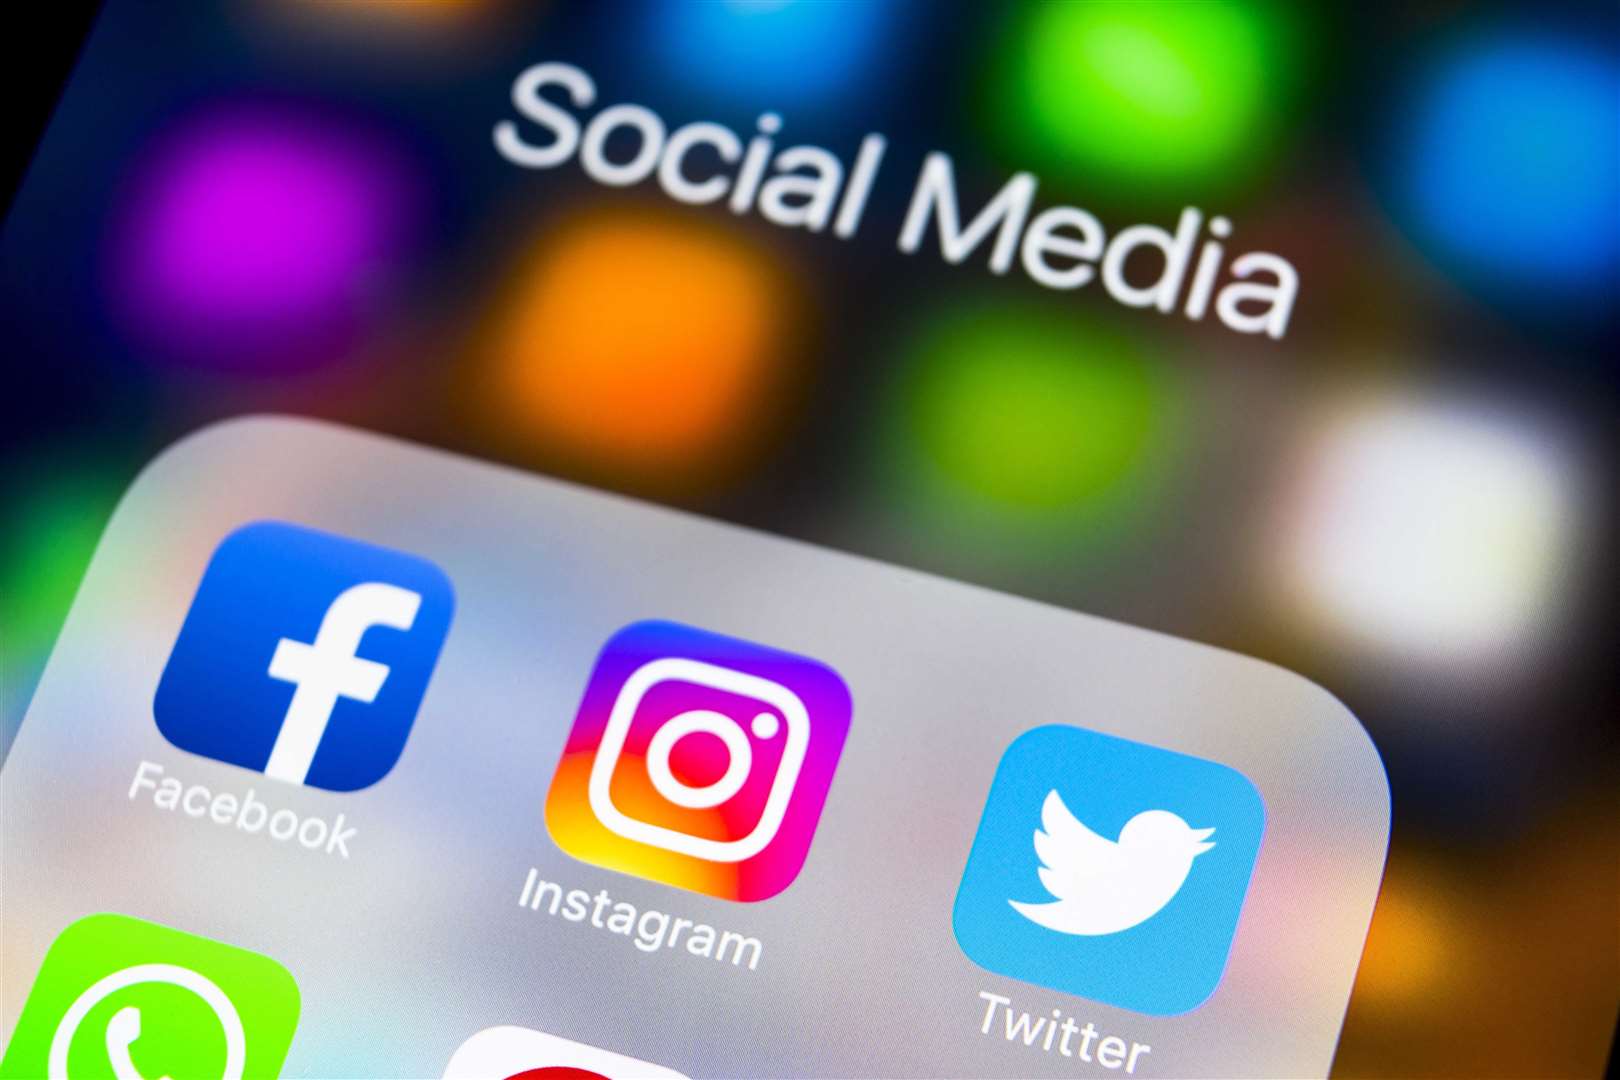 Social media companies are being urged to adopt a stronger stance against abuse on their platforms.